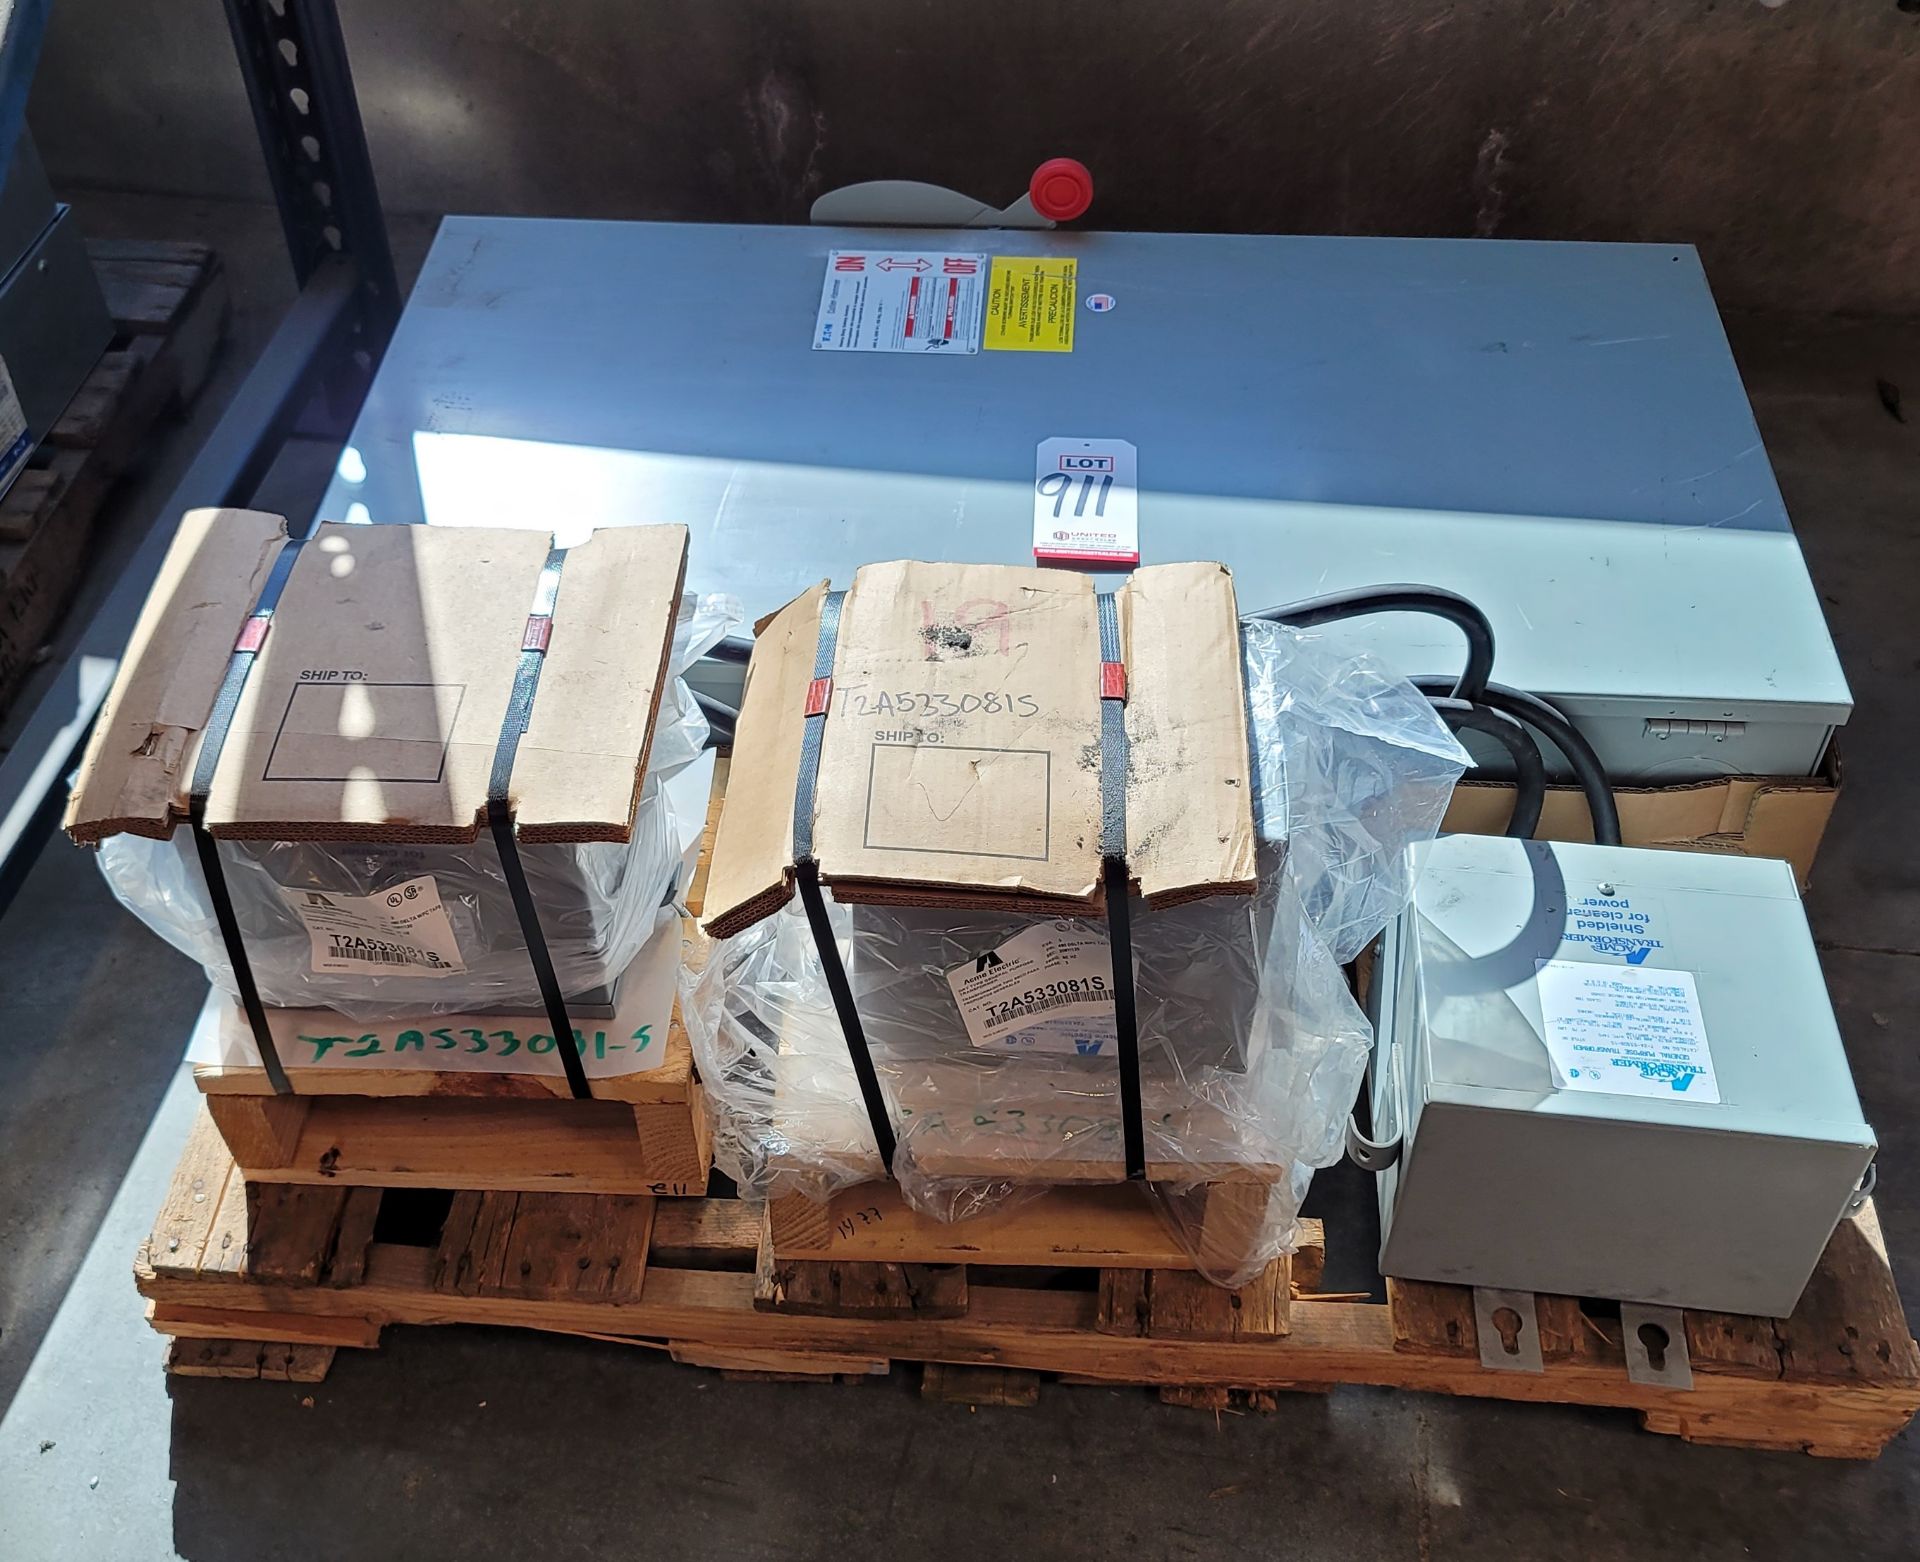 LOT - (3) ACME ELECTRIC T2A533081S DRY TYPE TRANSFORMERS, 3 KVA AND (1) 400A/600V SAFETY SWITCH